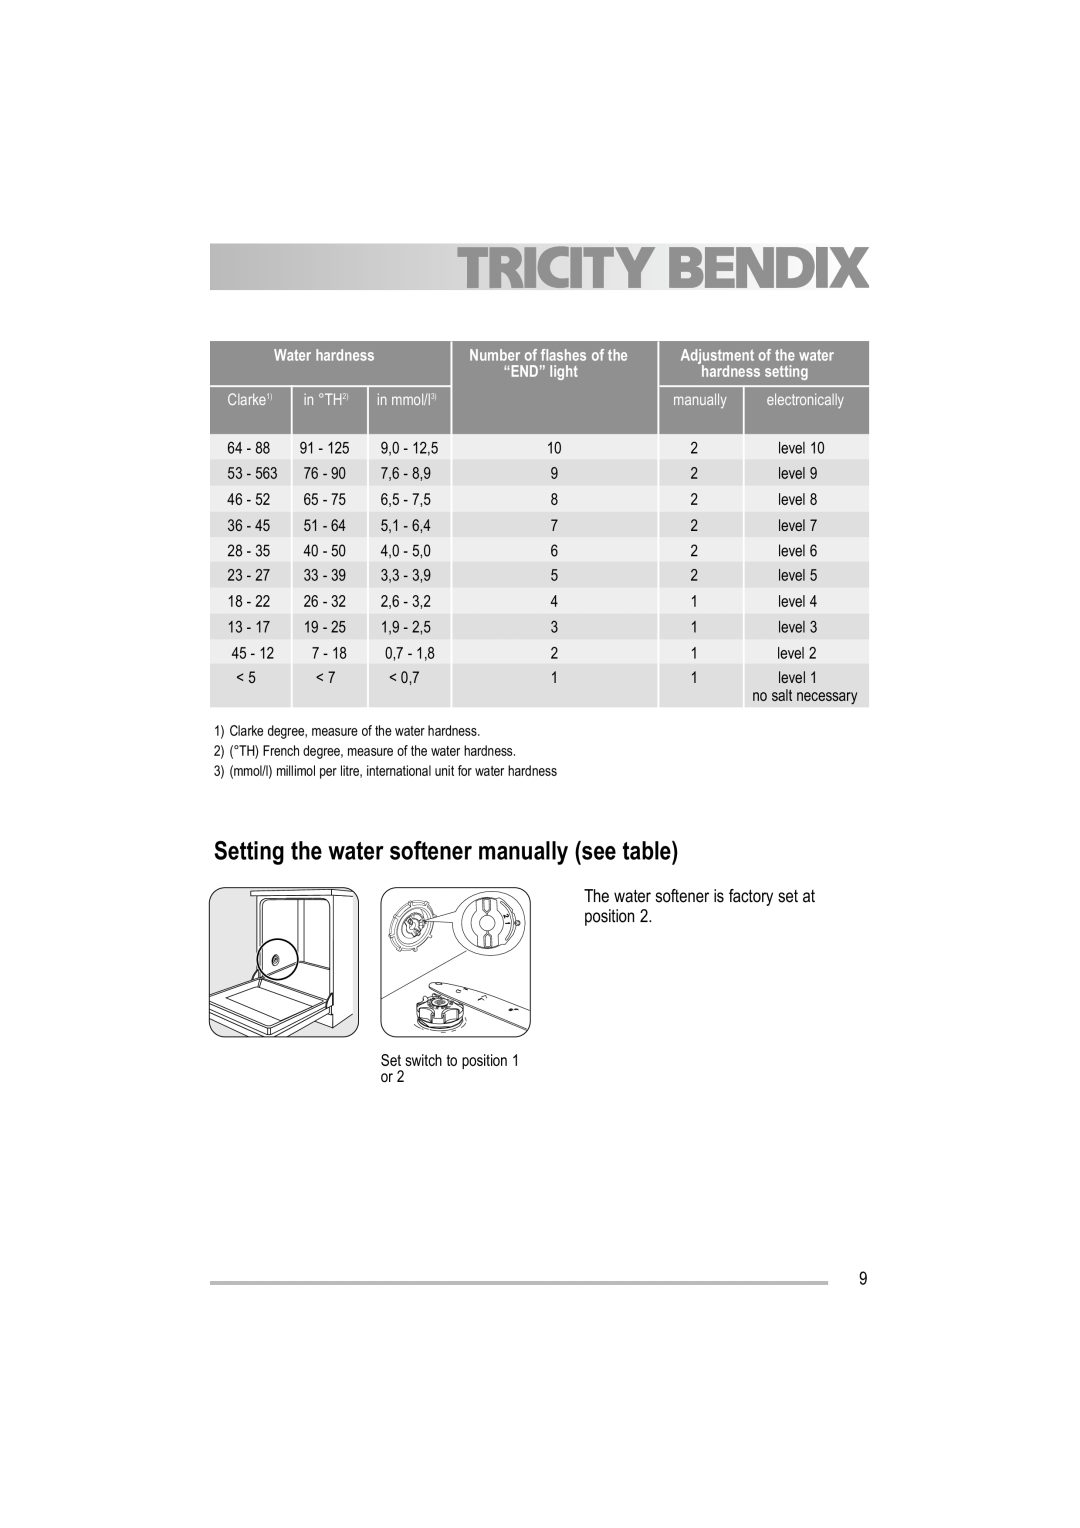 Tricity Bendix TBDW 32 Setting the water softener manually see table, Water hardness, Number of flashes of the “END” light 